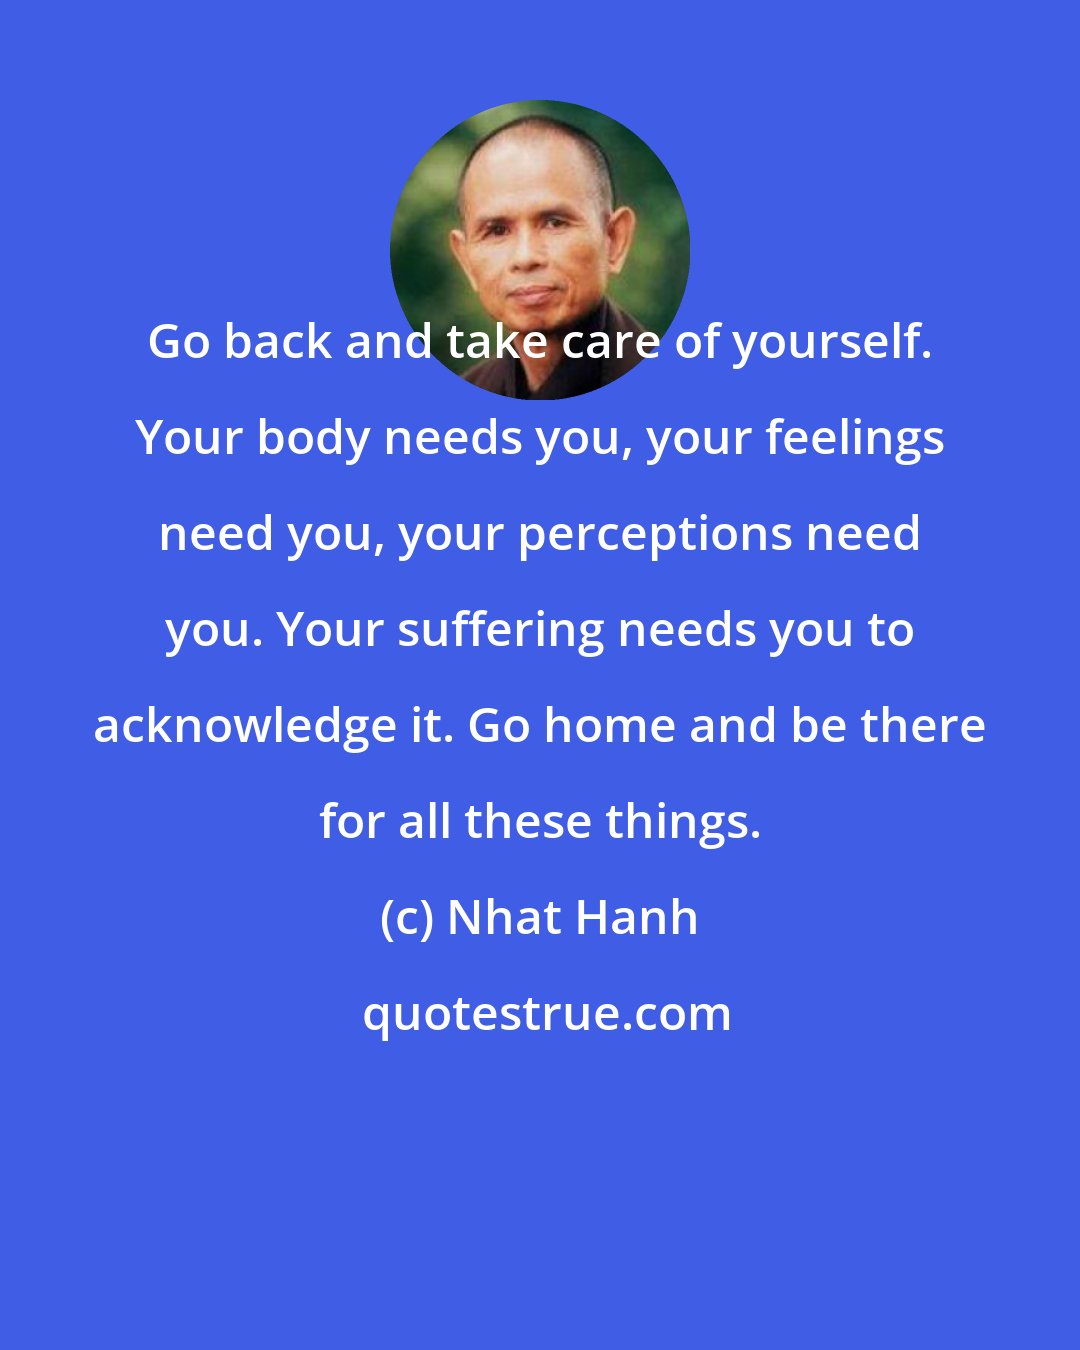 Nhat Hanh: Go back and take care of yourself. Your body needs you, your feelings need you, your perceptions need you. Your suffering needs you to acknowledge it. Go home and be there for all these things.